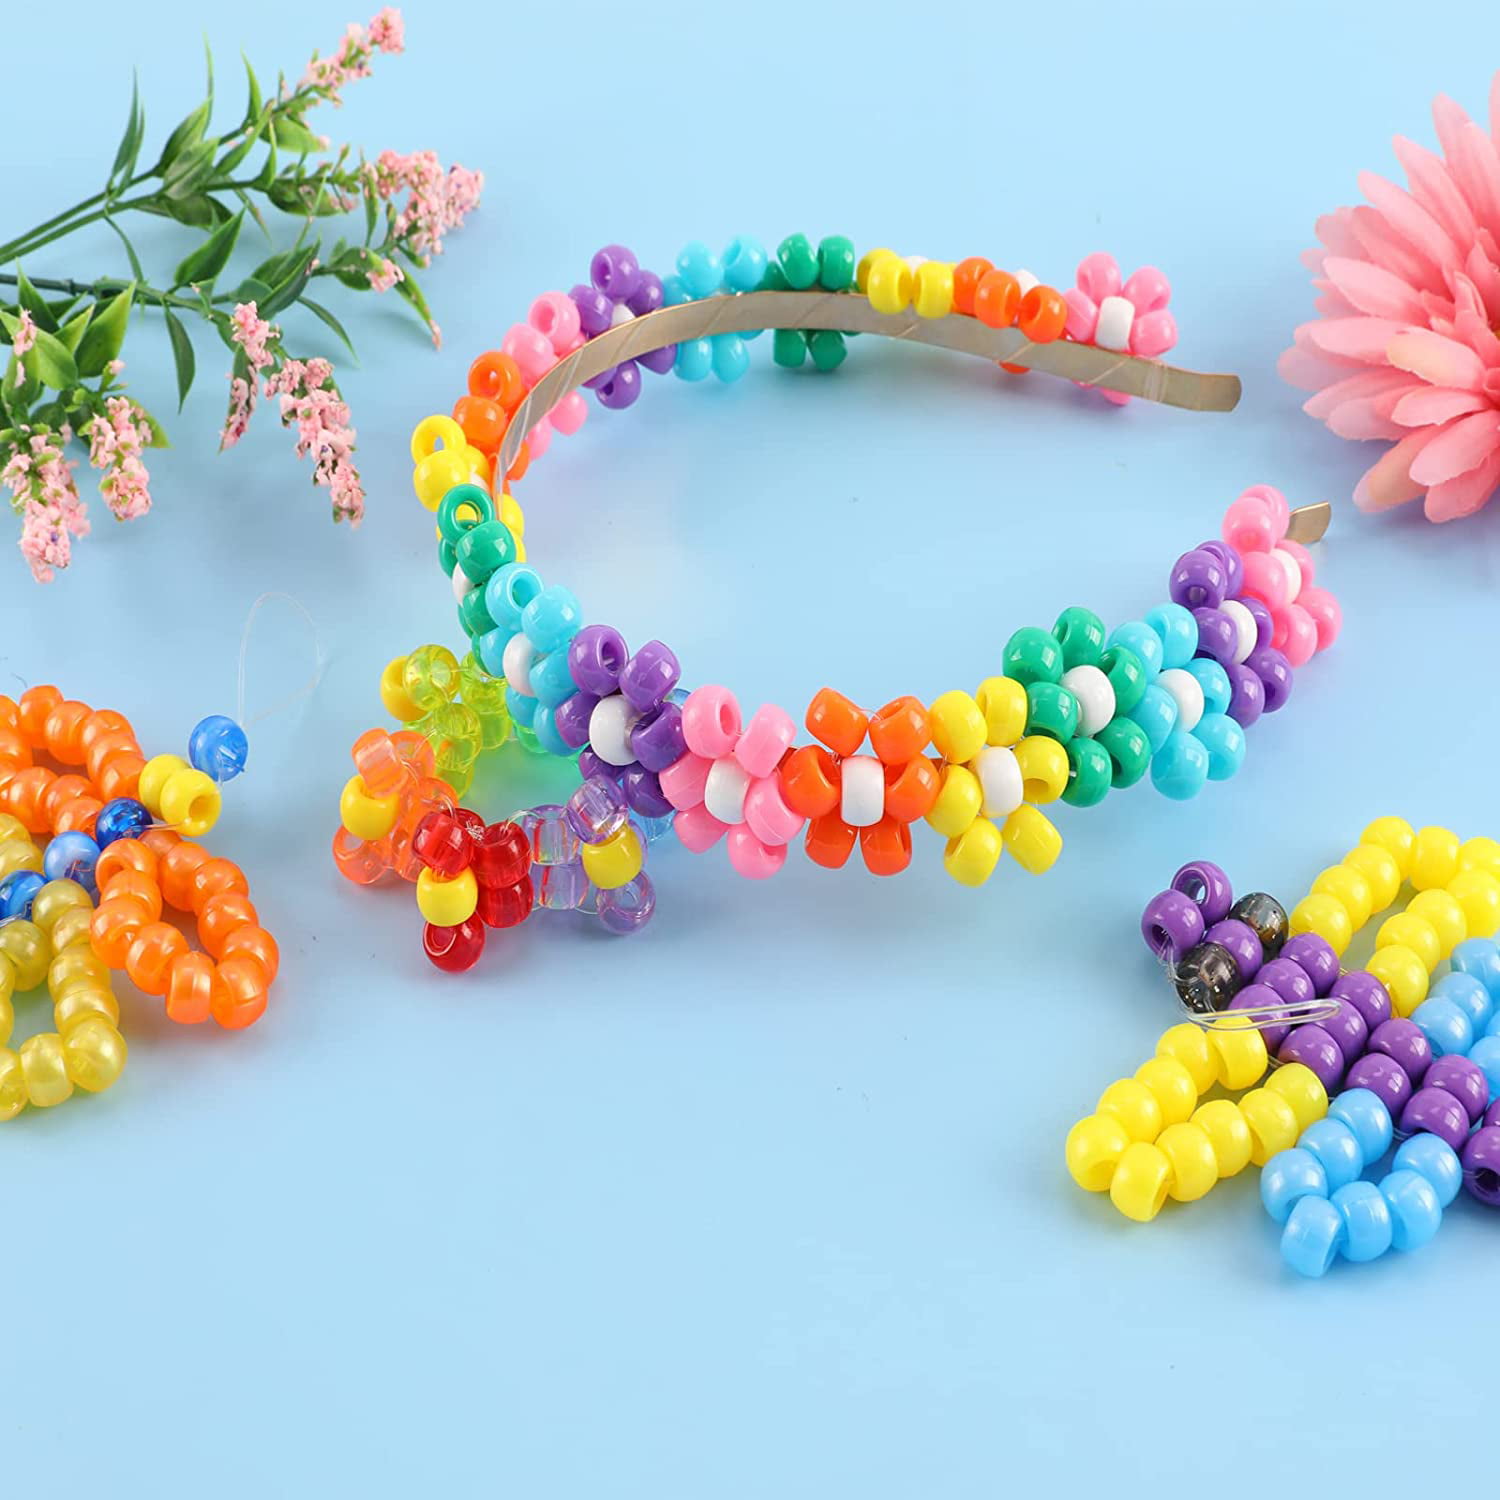 Miss Rabbit 1610+ Pcs Kandi Beads Bracelet Making Kit, Rainbow Pony Beads  for Jewelry Making with Letter Beads Elastic String, Hair Beads for Braids